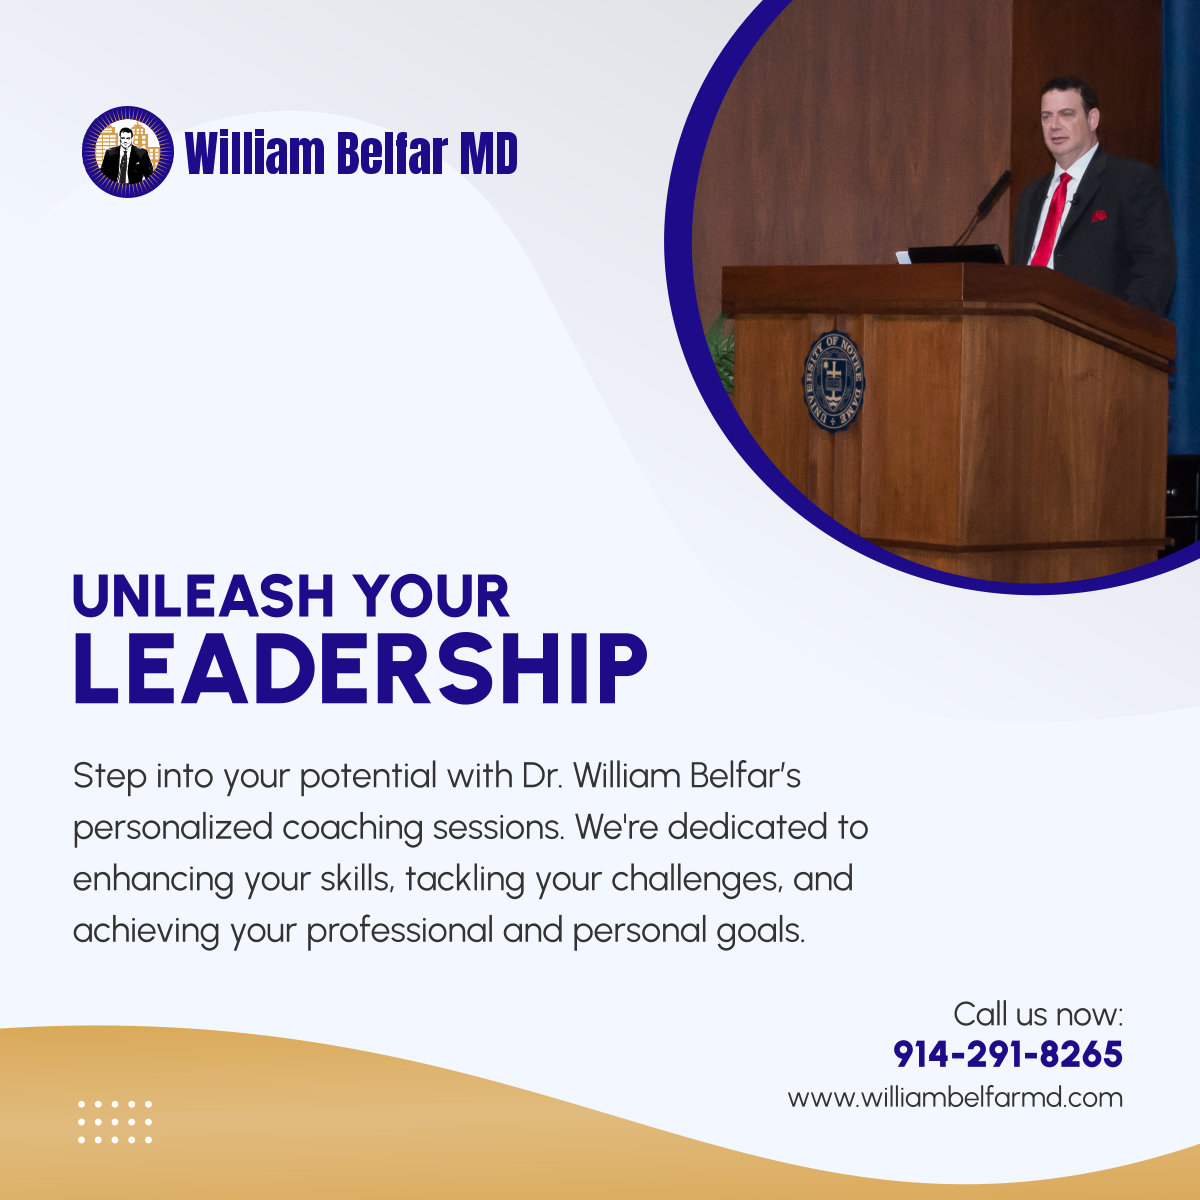 Are you ready to navigate the path to success? Join us to uncover your leadership potential and transform your aspirations into achievements.

#NewRochelleNY #CoachingAndPublicSpeaking #LeadershipDevelopment #LeadershipUnleashed #PersonalGrowthJourney